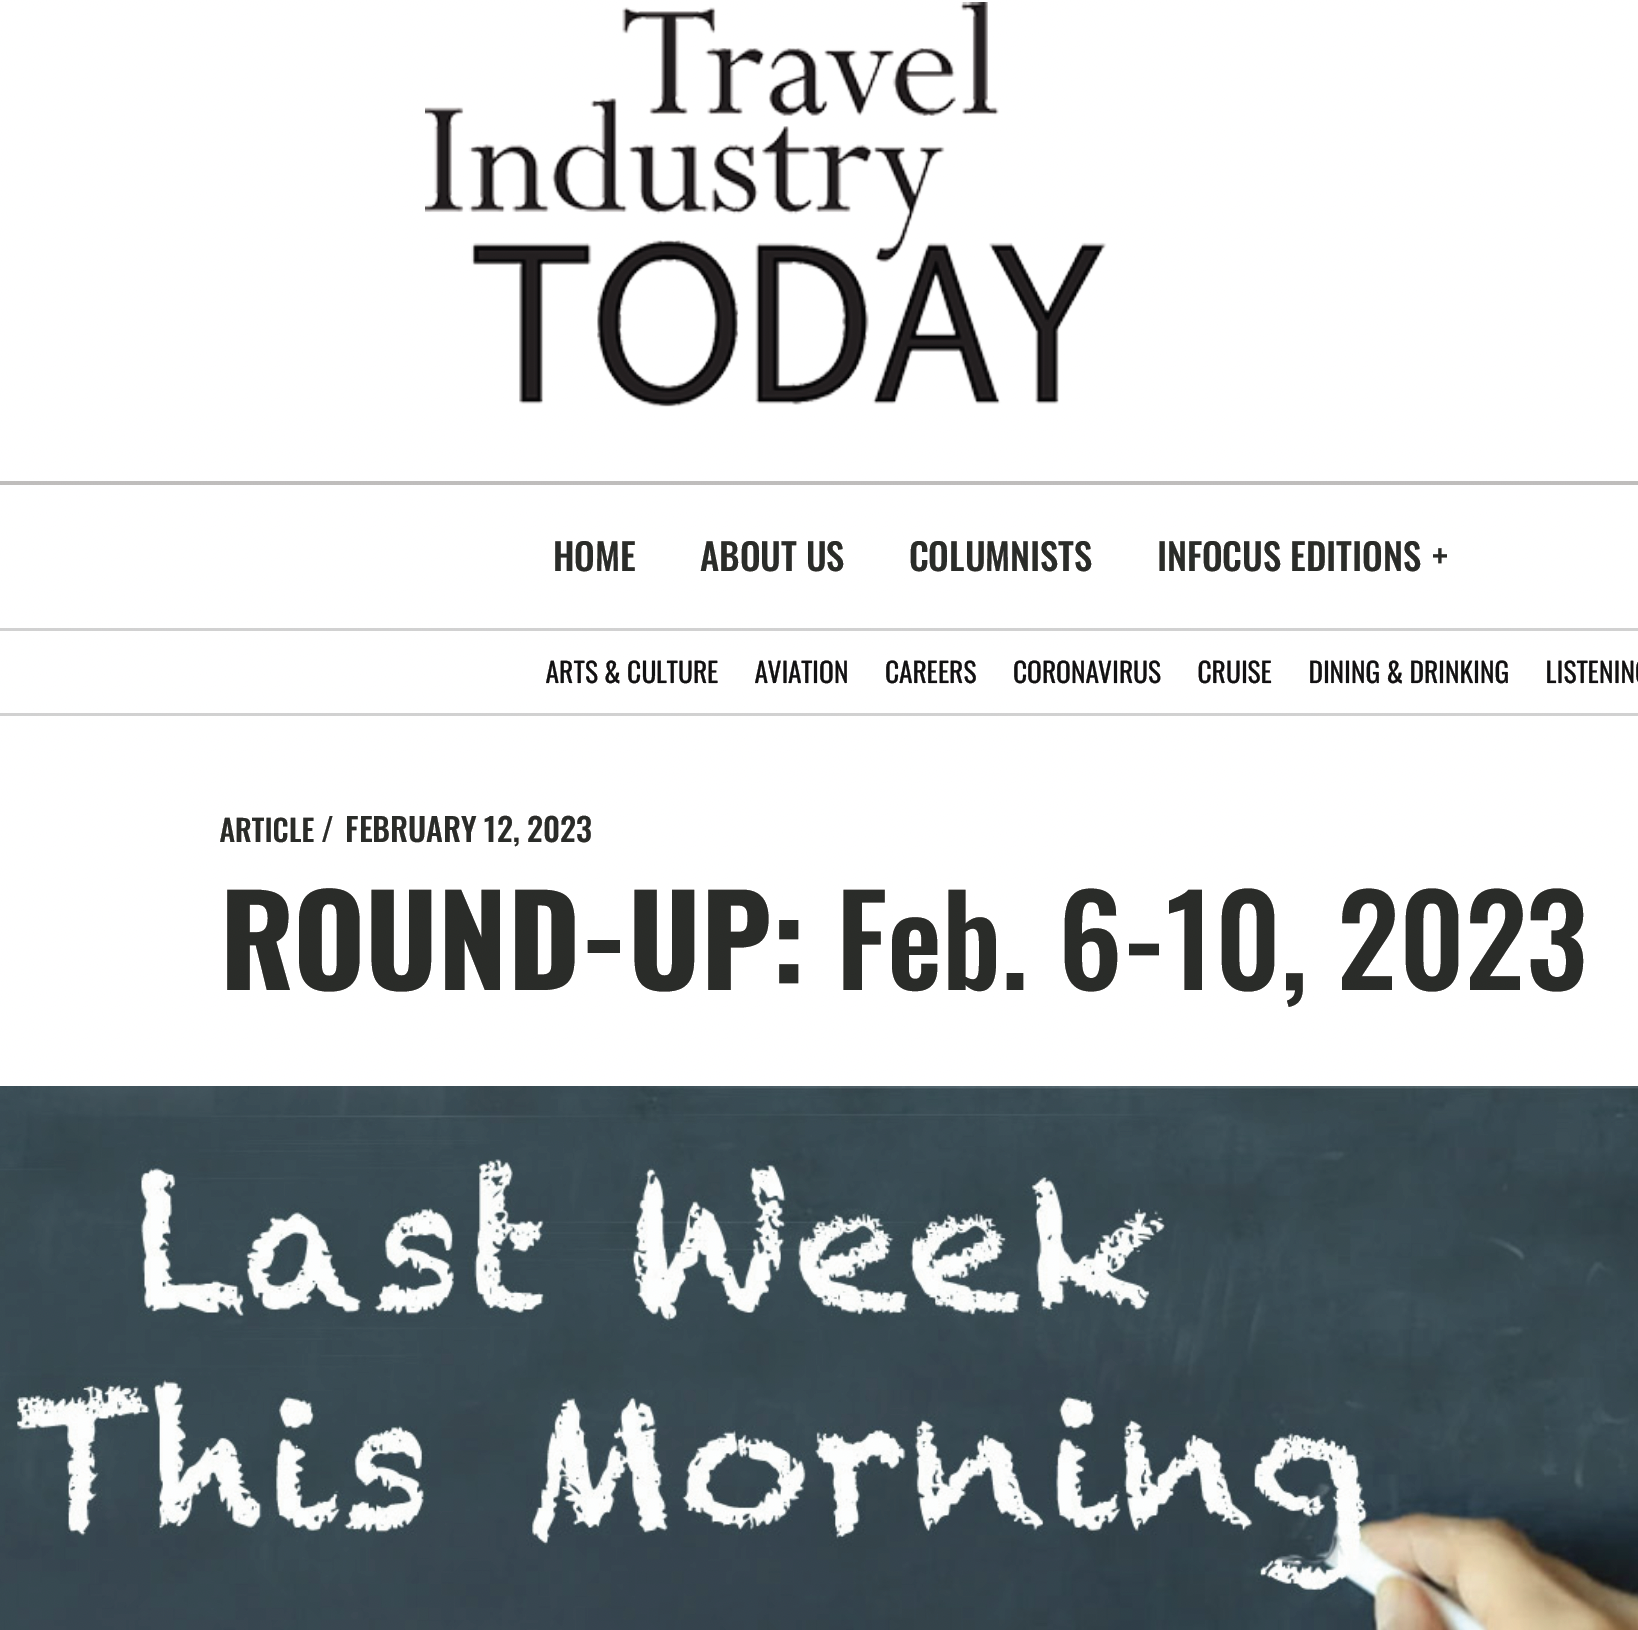 TRAVEL INDUSTRY TODAY